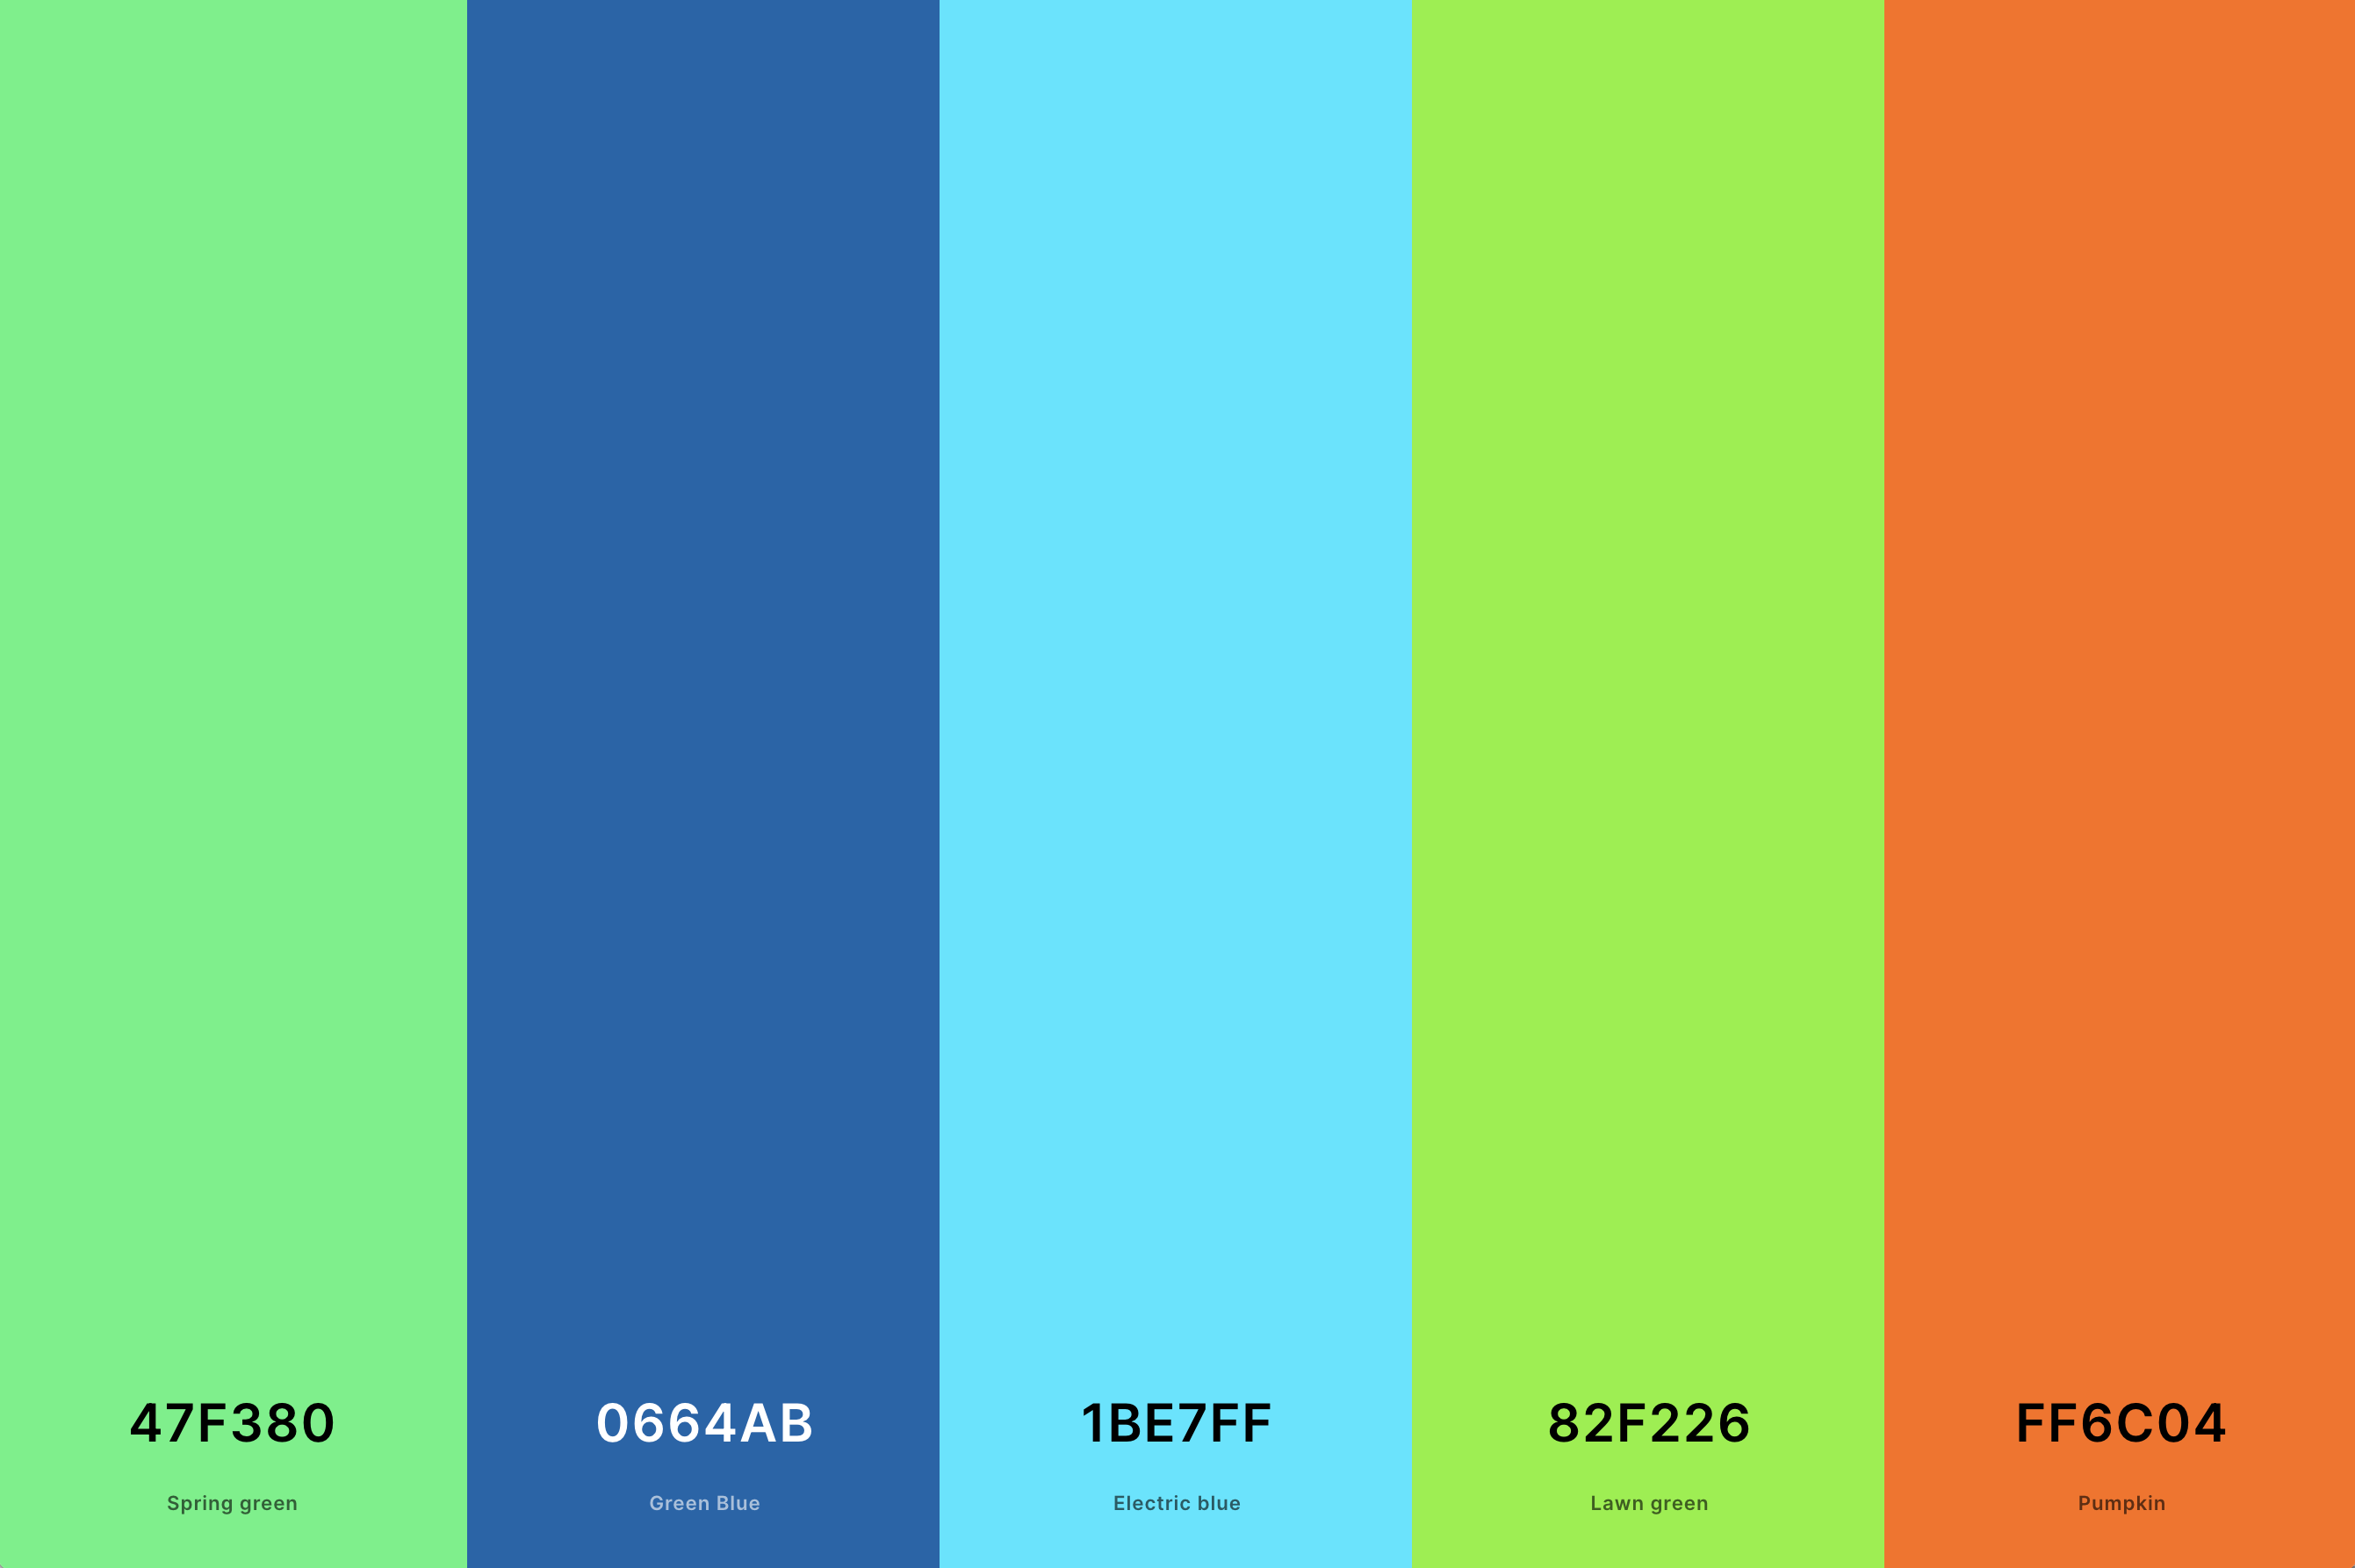 11. Blue, Green And Orange Color Palette Color Palette with Spring Green (Hex #47F380) + Green Blue (Hex #0664AB) + Electric Blue (Hex #1BE7FF) + Lawn Green (Hex #82F226) + Pumpkin (Hex #FF6C04) Color Palette with Hex Codes